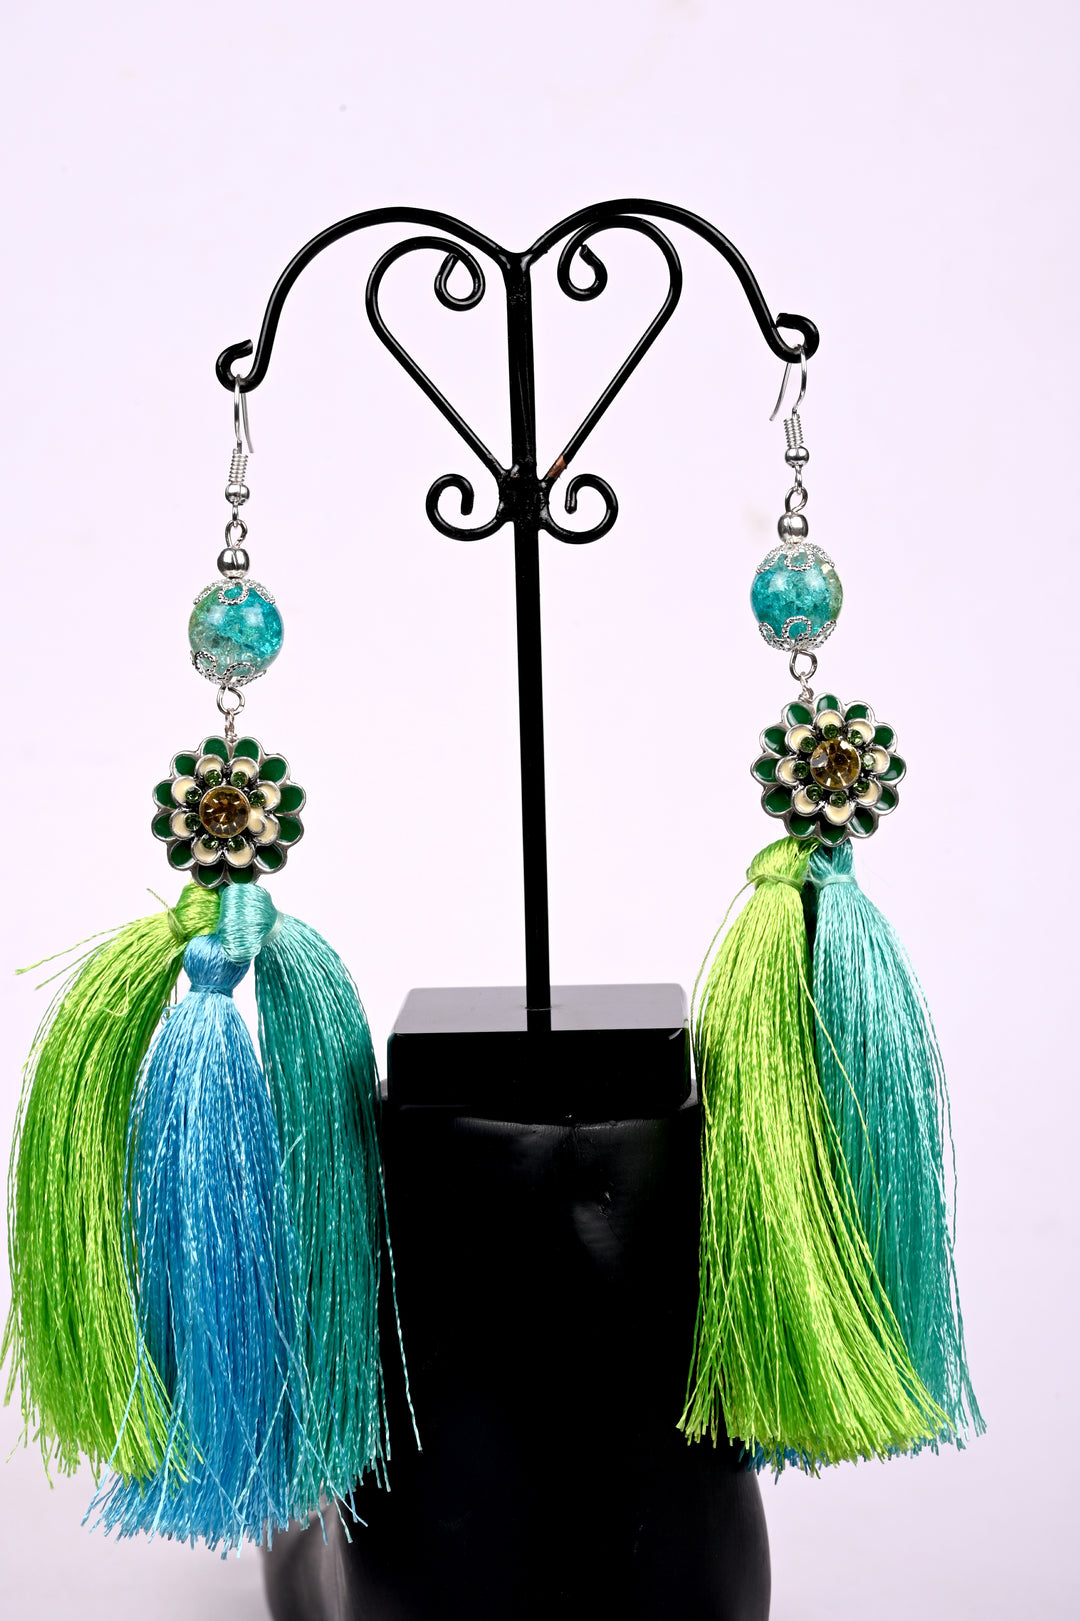 Green & Turquoise Tassel Earring Styled With Flower Shaped Metal Charm & Glass Crackle Bead